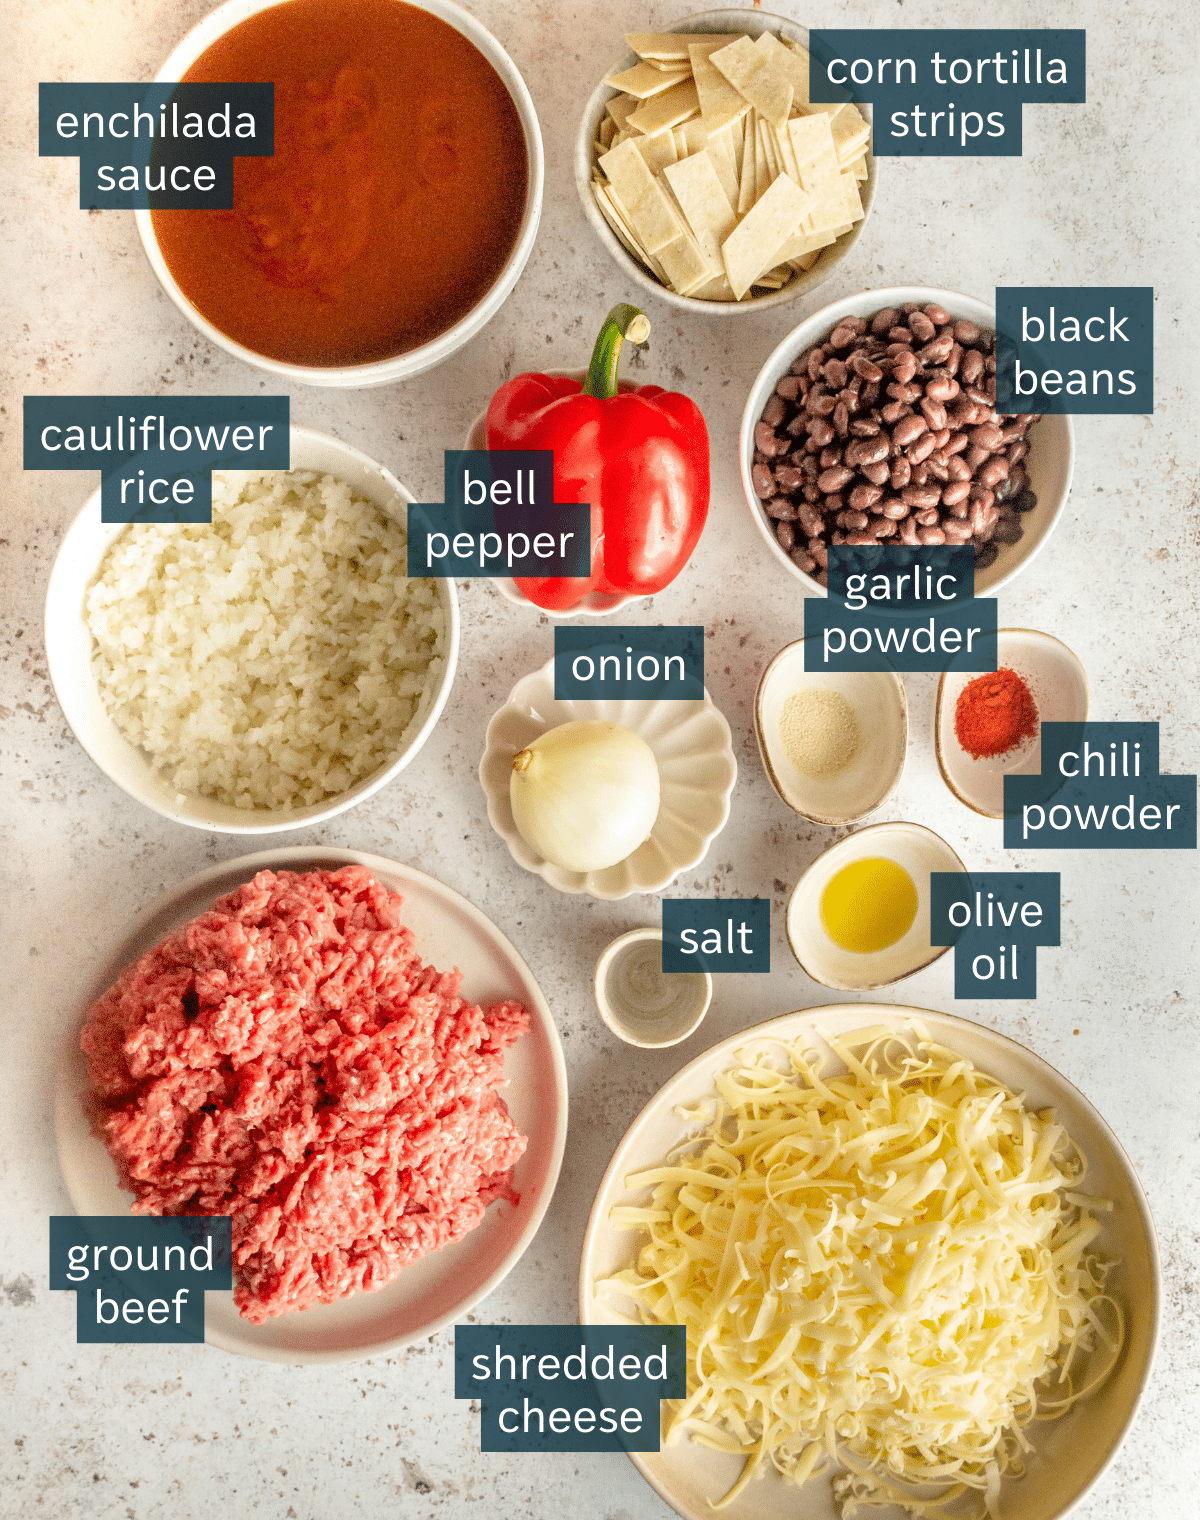 All of the ingredients needed for ground beef skillet enchiladas portioned out in different sized bowls and plates on a light gray surface.